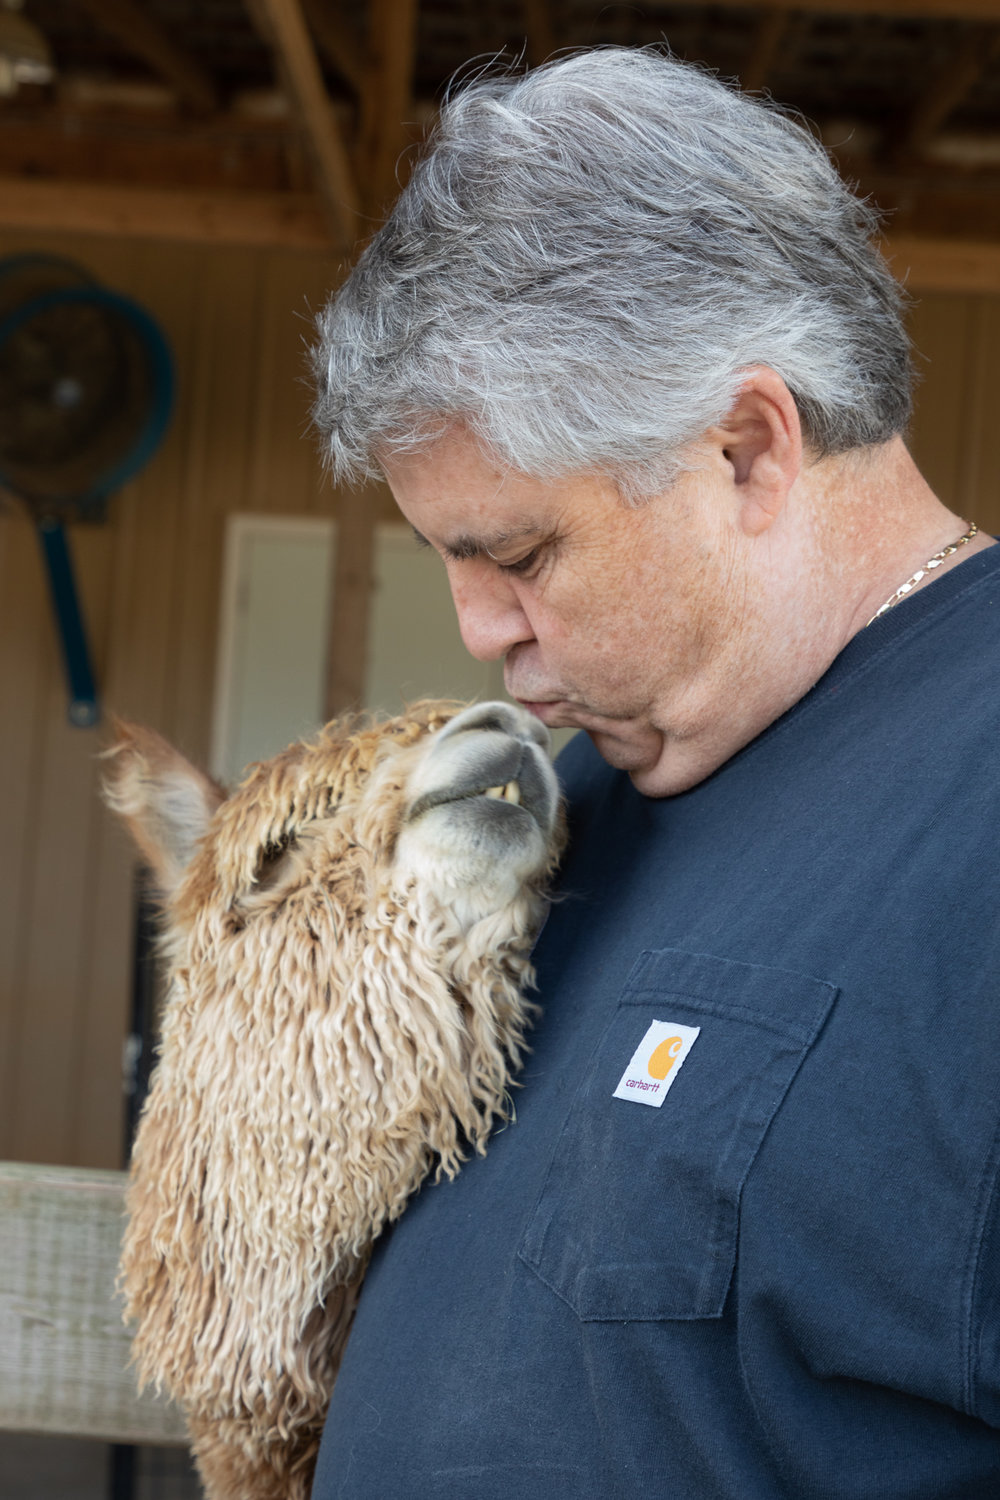 An alpaca gives a visitor a kiss during Carolina Sunshine Alpaca Farm's grand opening event. Visitors can see both fleece types — suri and huacaya alpacas — on the farm.